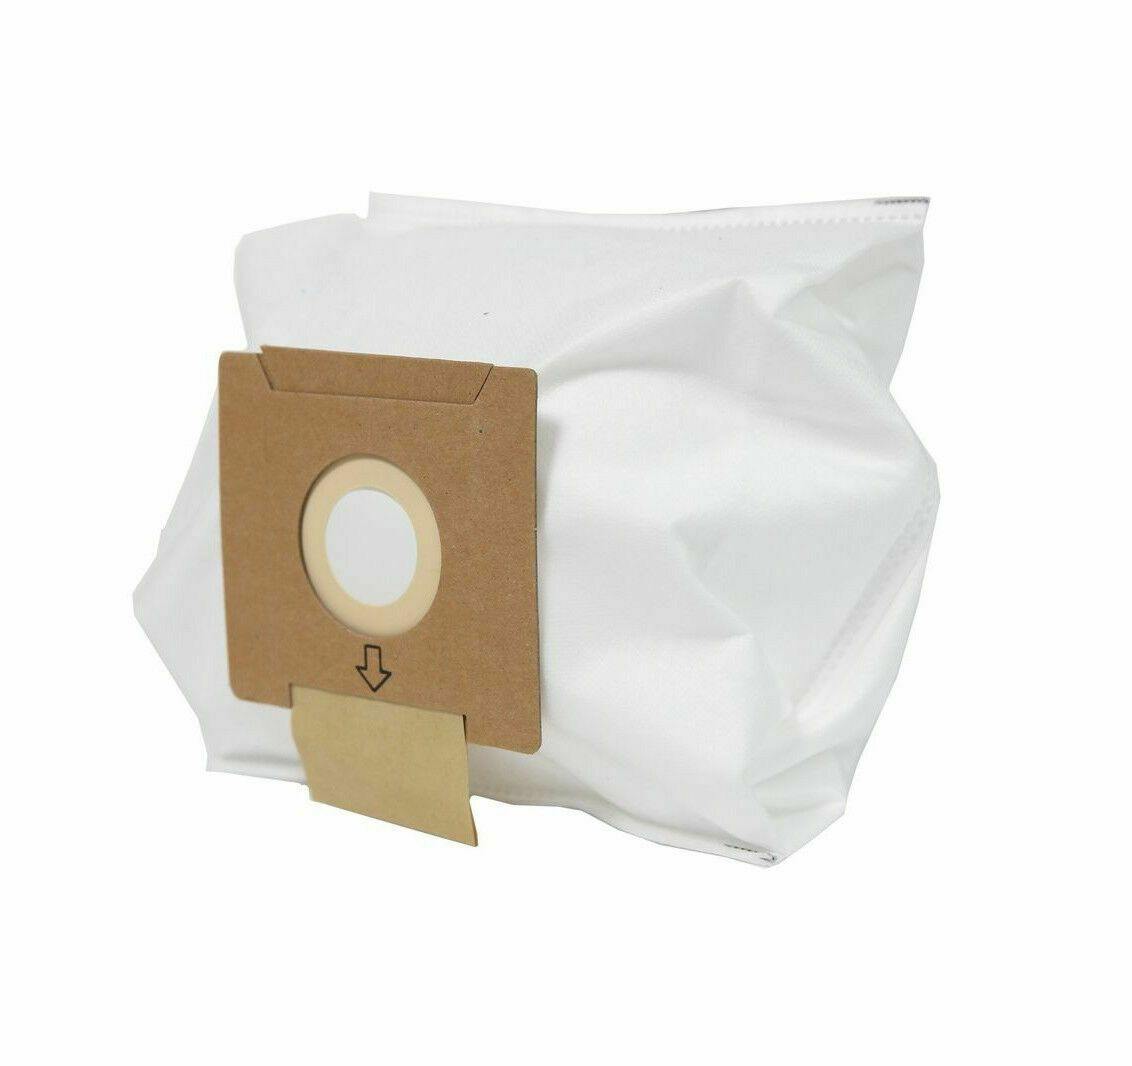 6X Synthetic Dust Bags For Wertheim W2000 Cat & Dog GERMOSTADT Sparesbarn